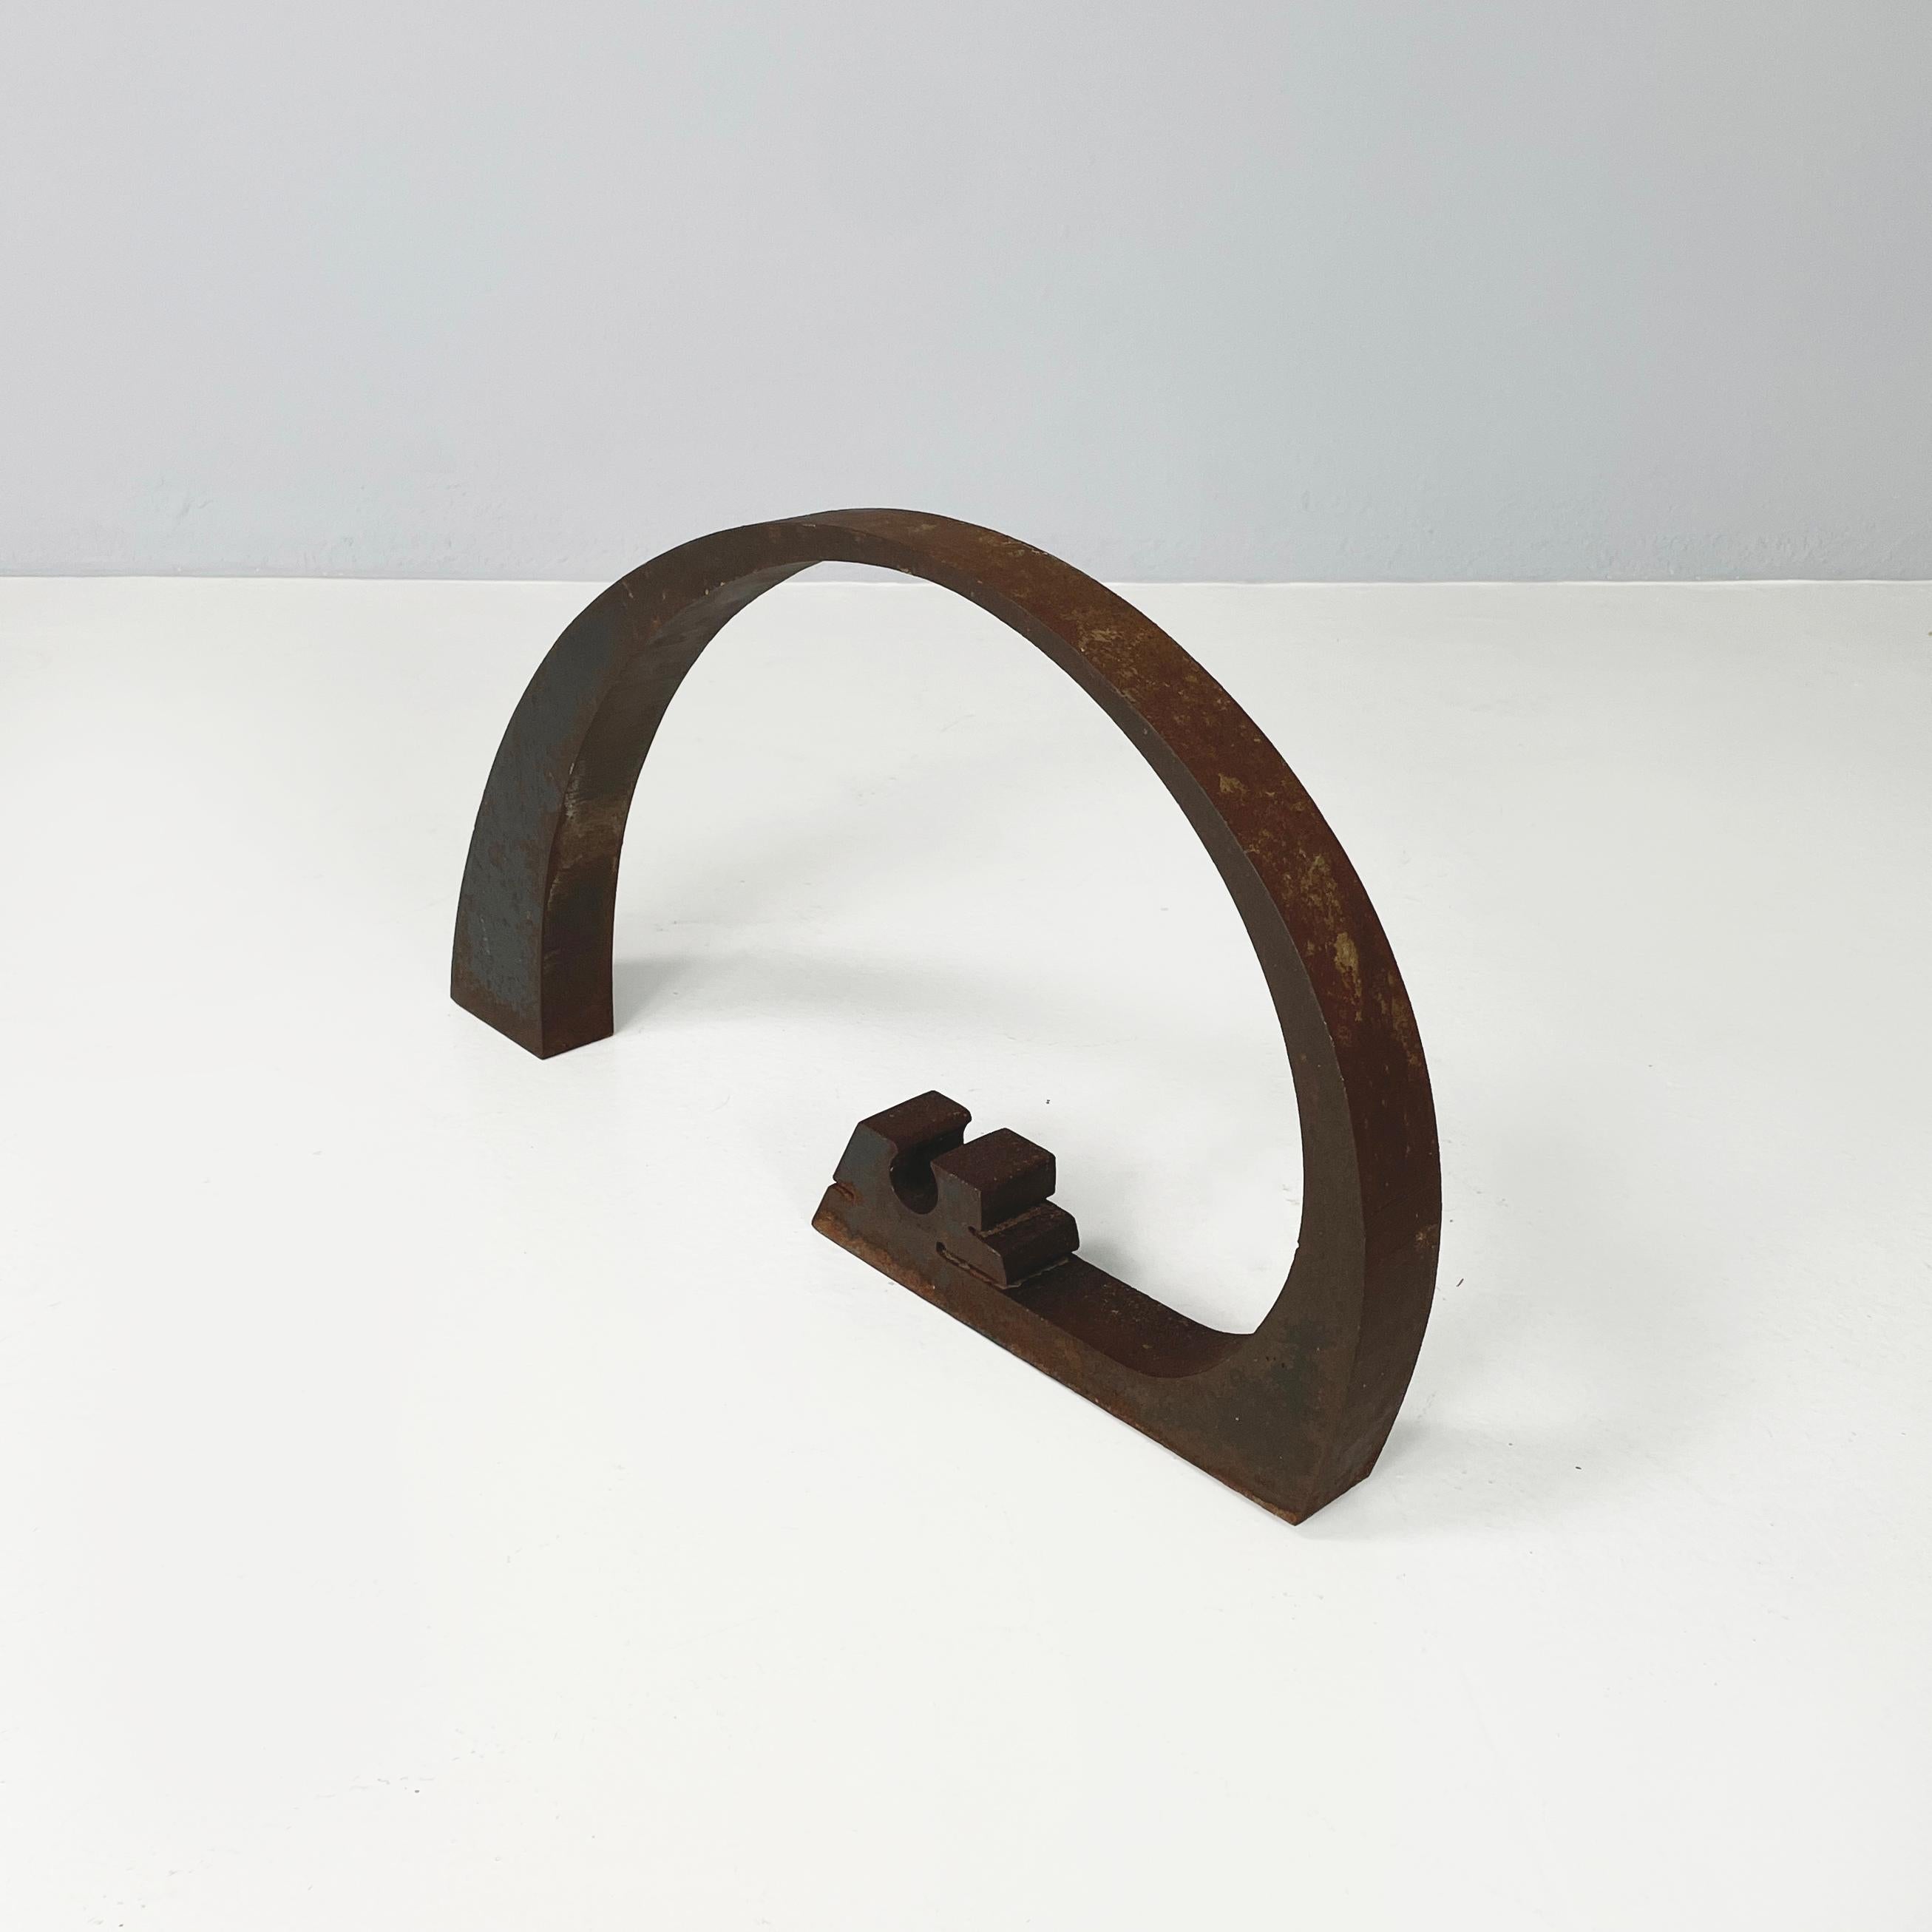 Italian modern Dark brown iron abstract sculpture by Edmondo Cirillo, 1970s
Dark brown iron sculpture. The subject is abstract and the silhouette is rounded.
Produced by Edmondo Cirillo in 1970s.
Good conditions. The metal is oxidized and shows